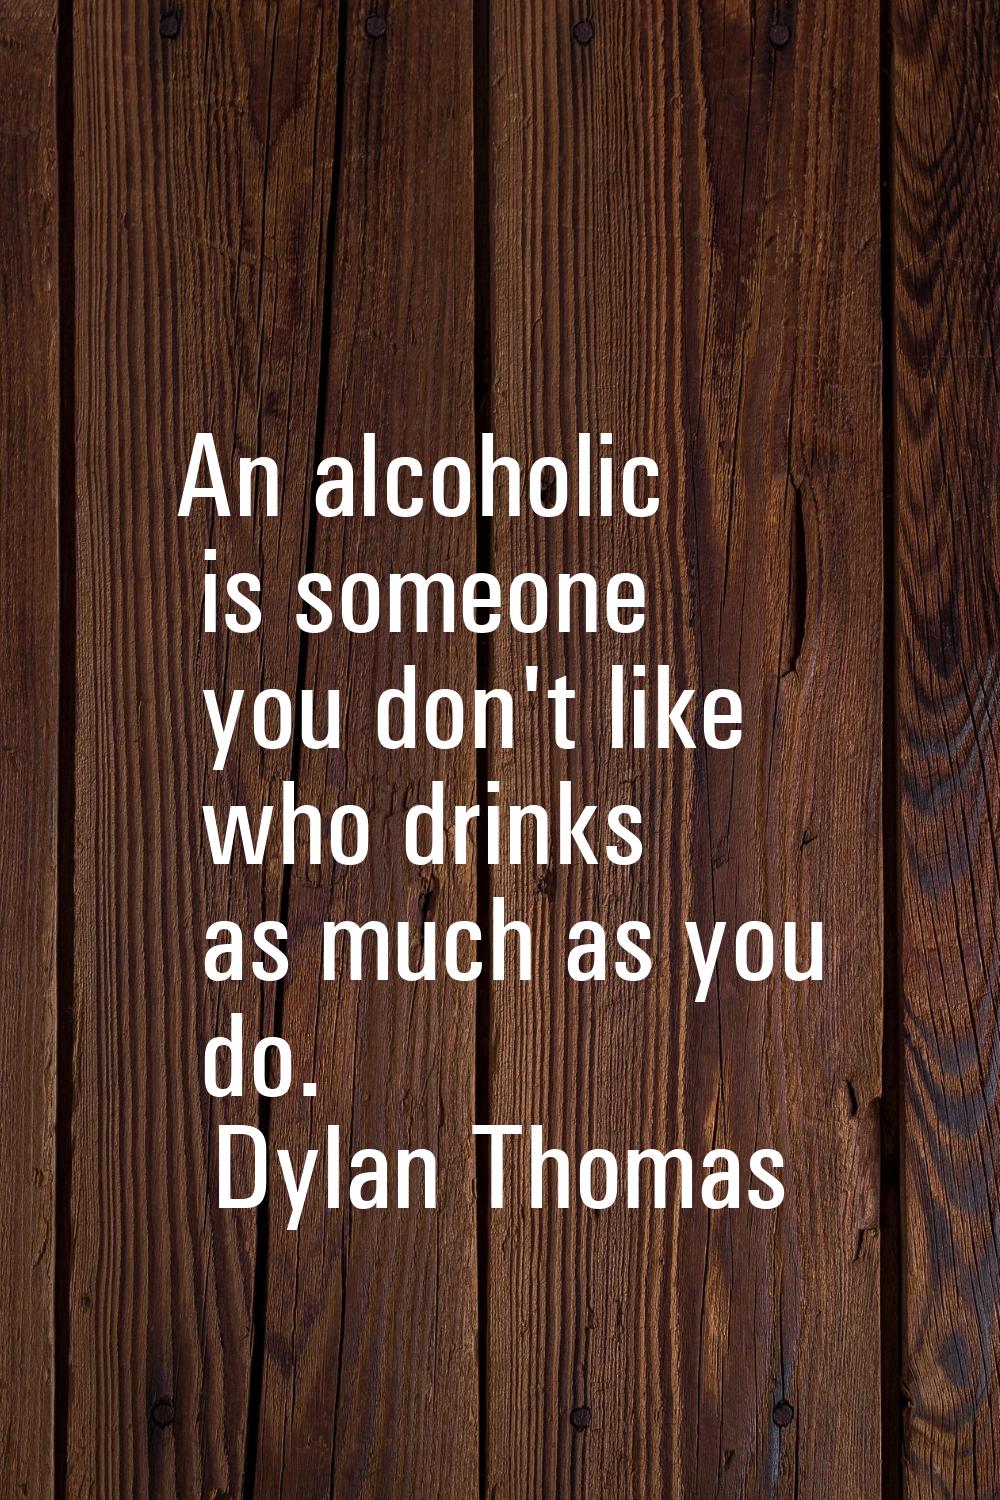 An alcoholic is someone you don't like who drinks as much as you do.